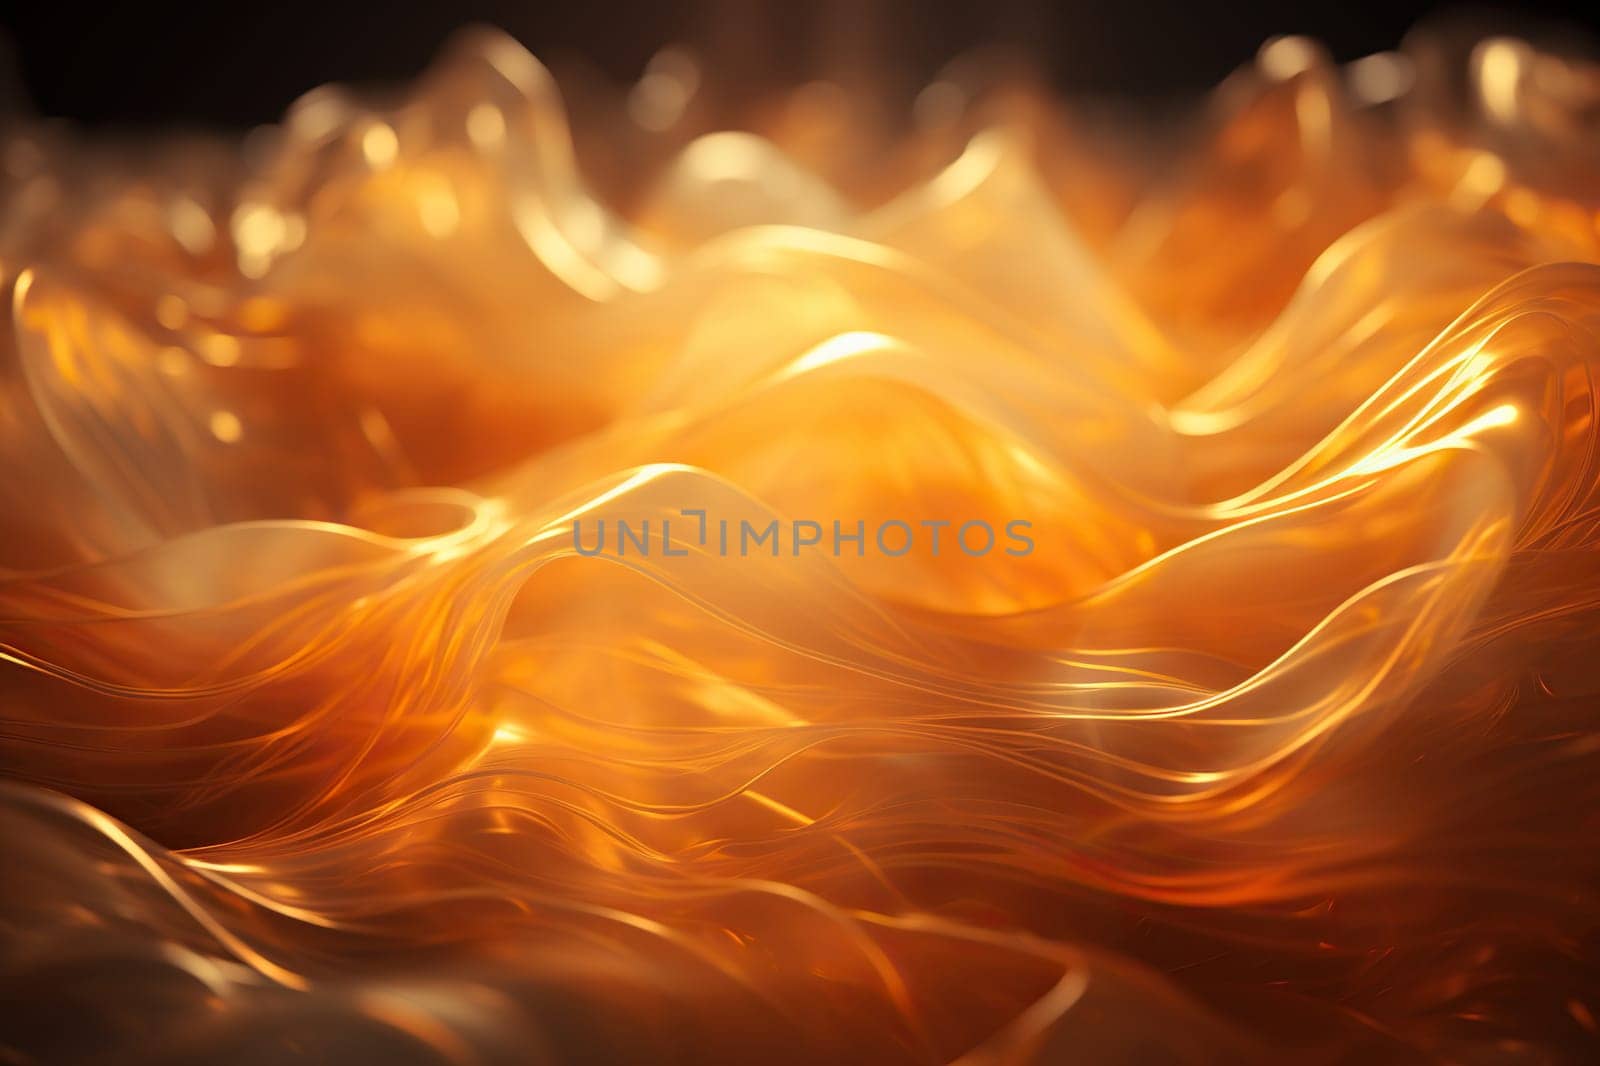 Abstract golden wave pattern with liquid effect. Place for text. Generated by artificial intelligence by Vovmar